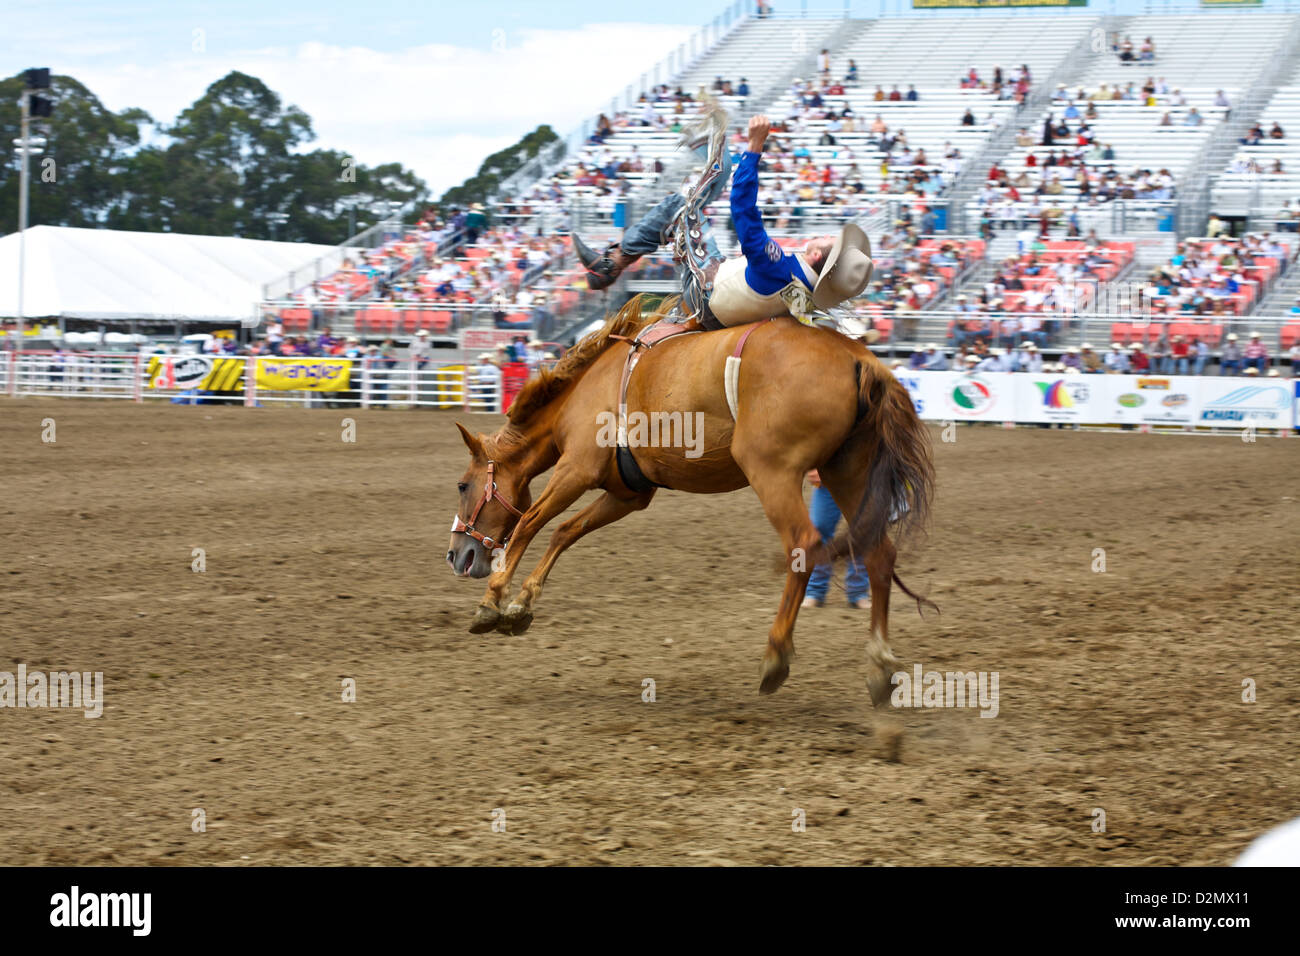 A cowboy leans back while riding a bucking bronco bareback at the Salinas rodeo Stock Photo